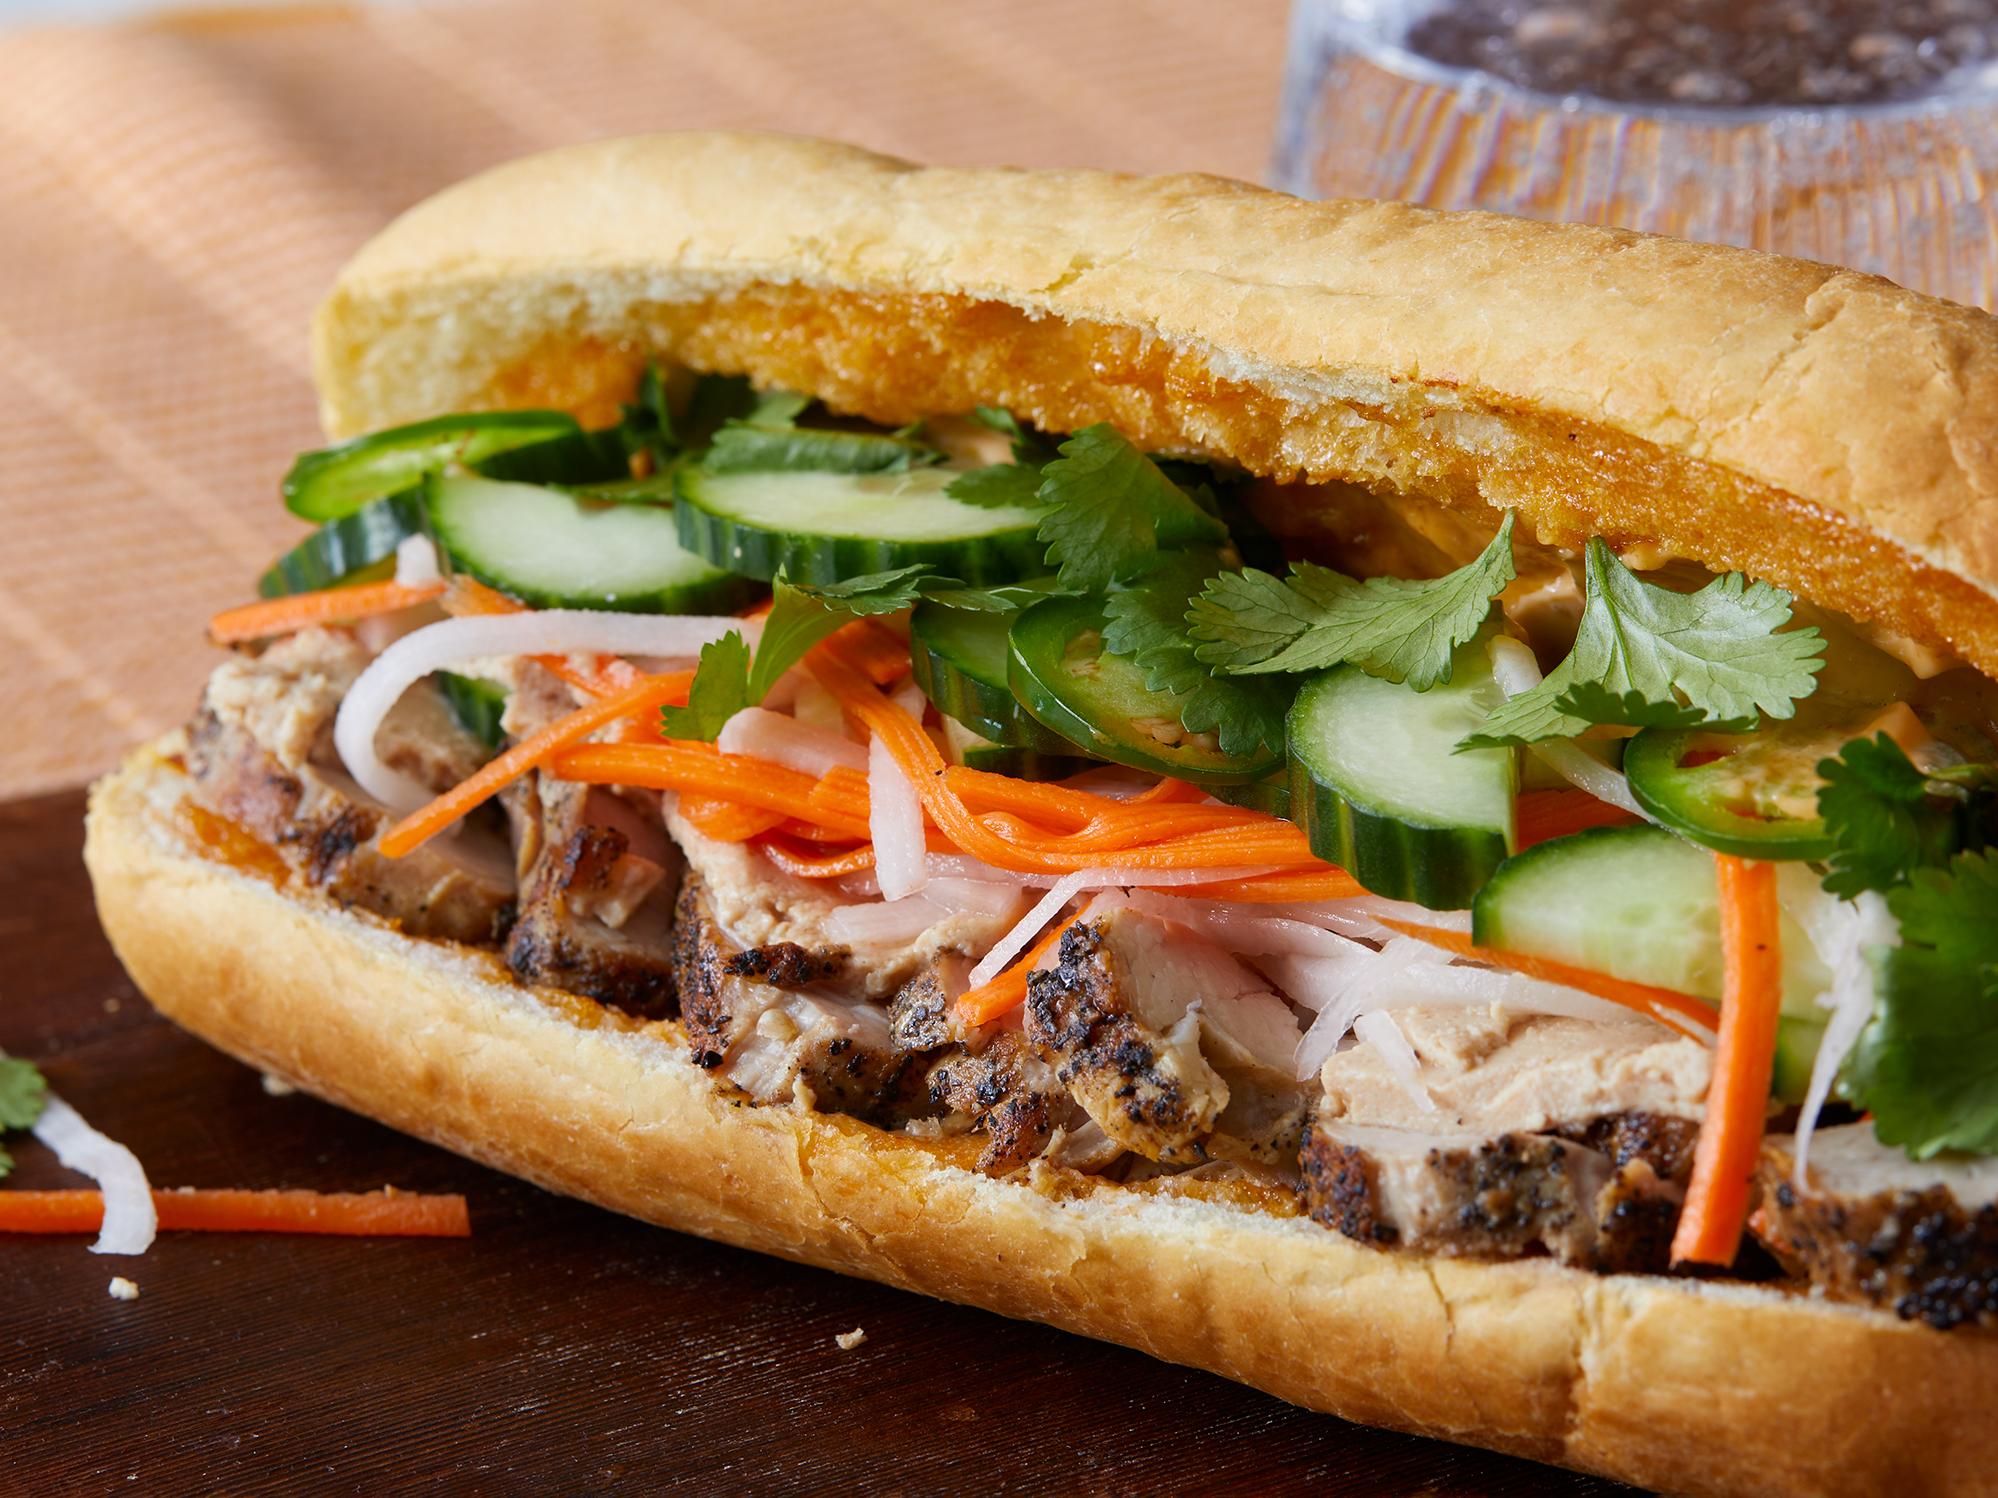  The colorful and fresh ingredients make this sandwich an Instagram-worthy dish.